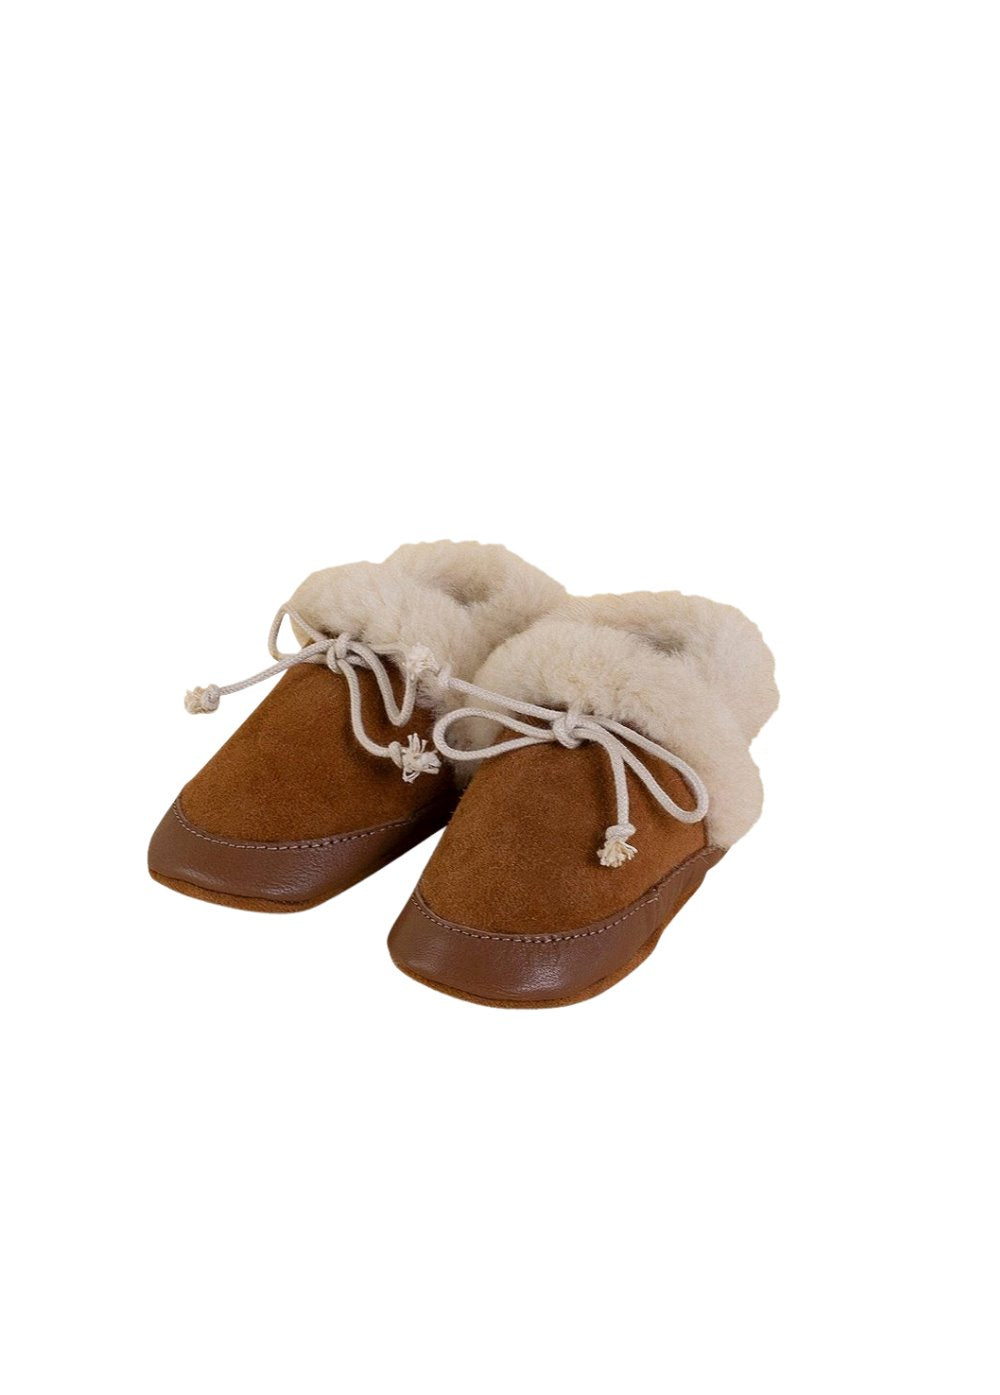 Brown Fuzzy Booties Shoes & Booties Dulis Shoes 